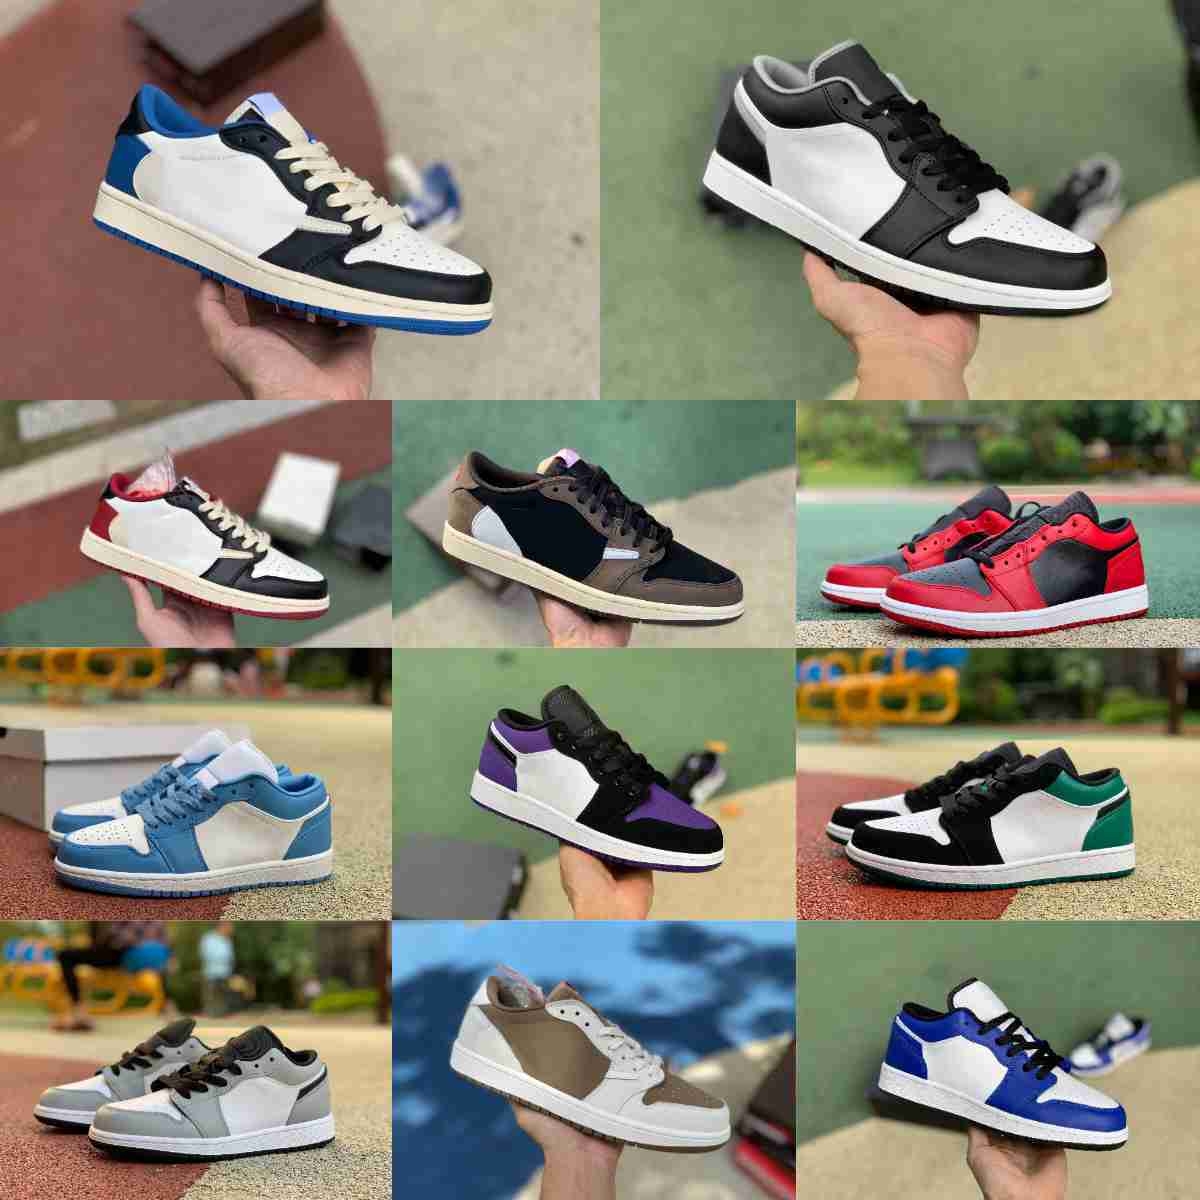 

Jumpman X 1 1S Low Sports Basketball Shoes Fragment TS White Brown Red Gold Grey Toe UNC Black Shadow Panda Emerald Crimson Tint Designer Sports Trainers Sneakers S68, Please contact us